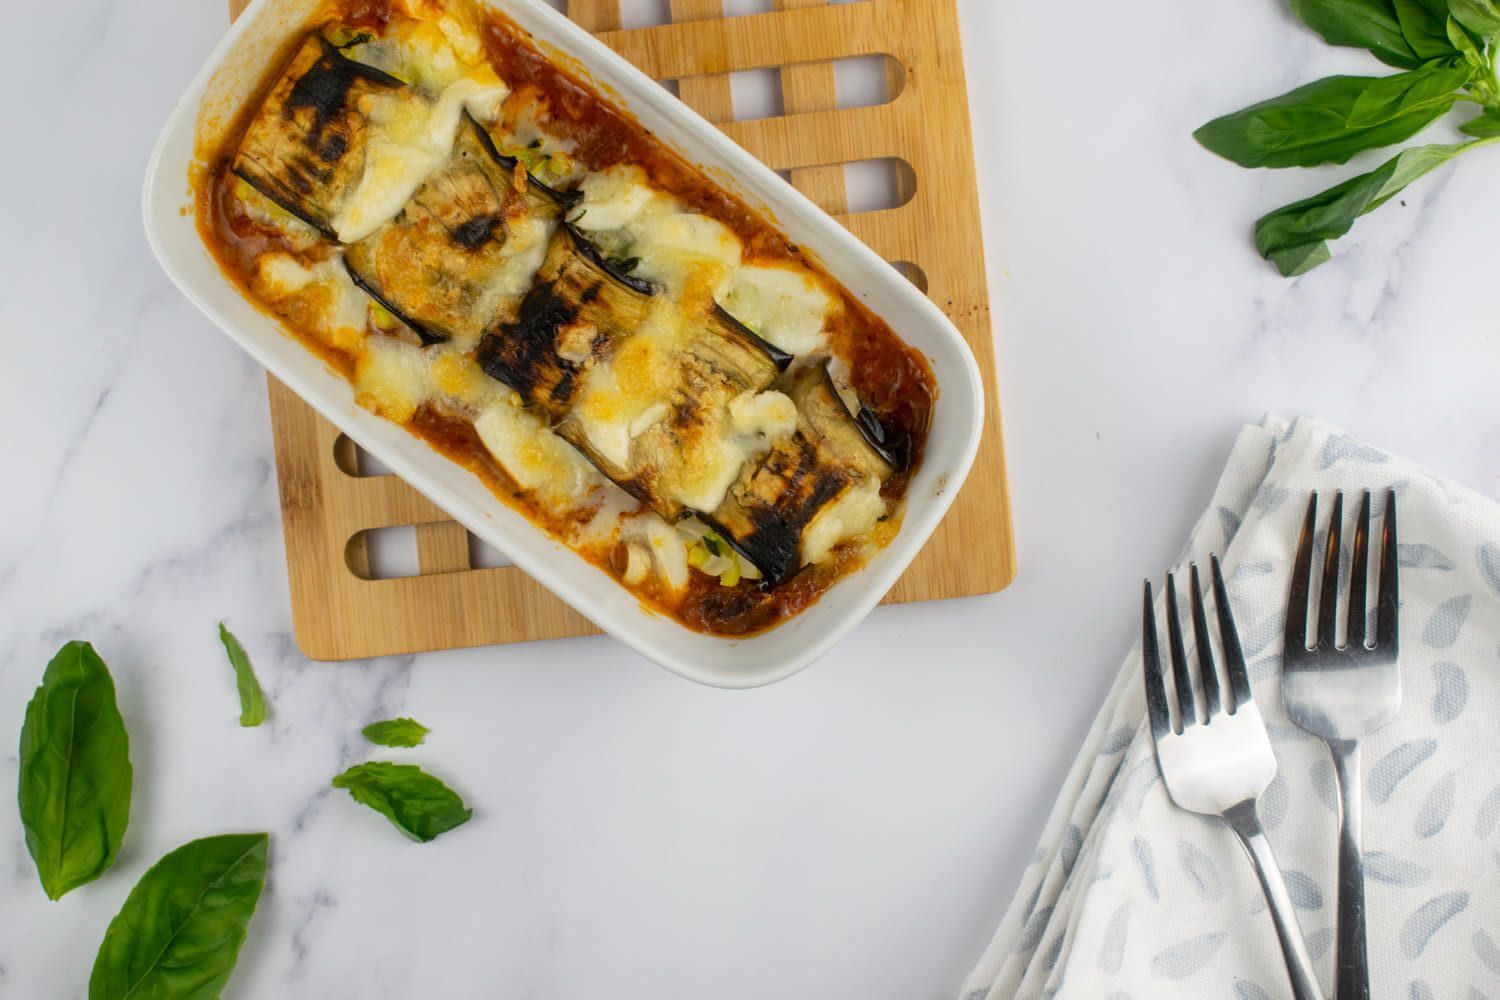 Eggplant rollatini with mozzarella cheese in a casserole dish with fresh basil.